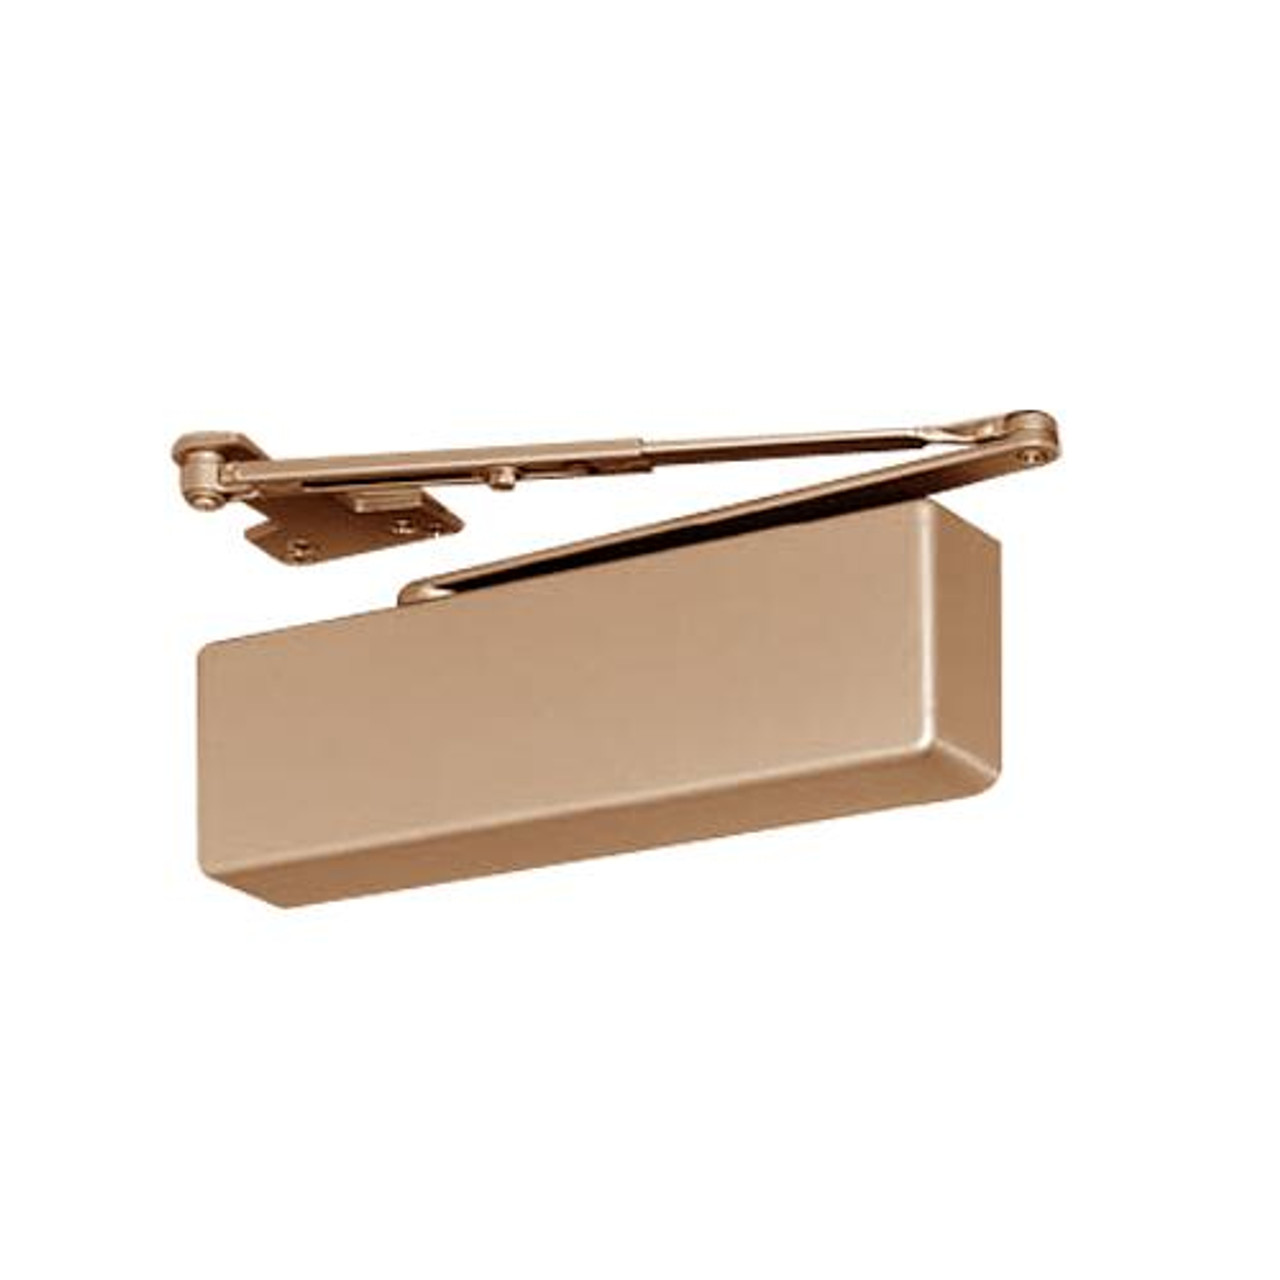 PA4480-691 Yale 4400 Series Institutional Door Closer with Parallel Low Profile Arm in Light Bronze